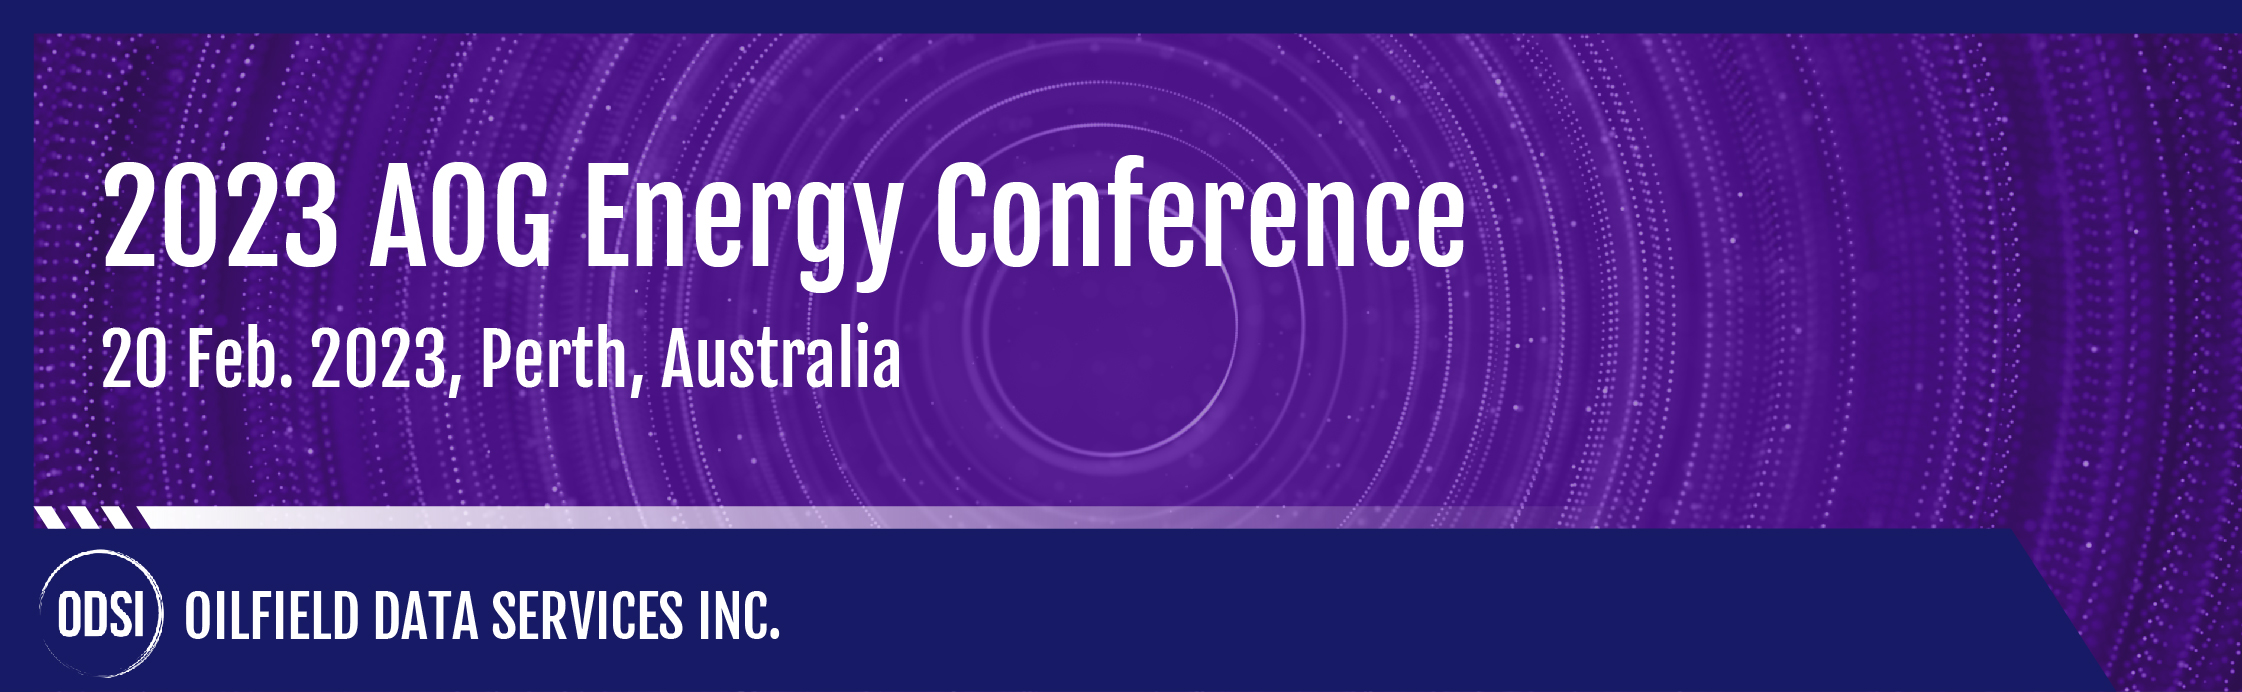 2023 AOG Energy Conference